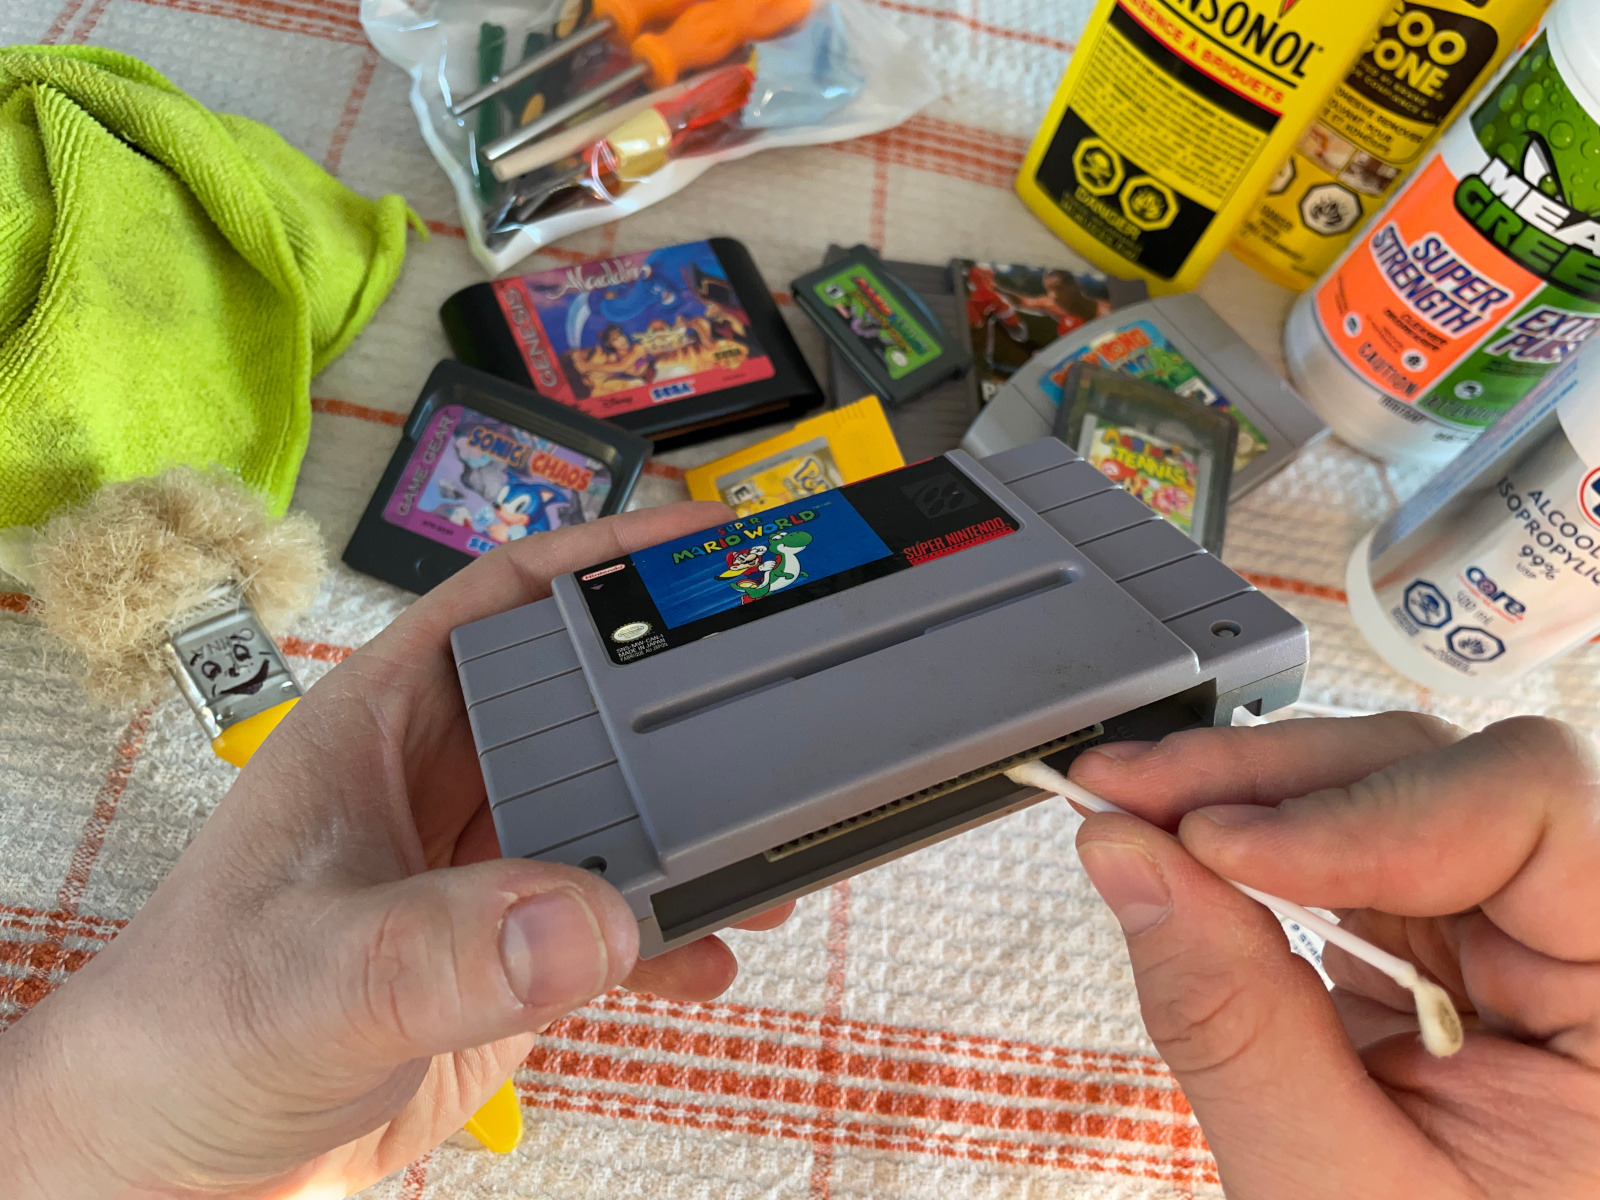 How to clean and preserve our Nintendo or SEGA cartridges?